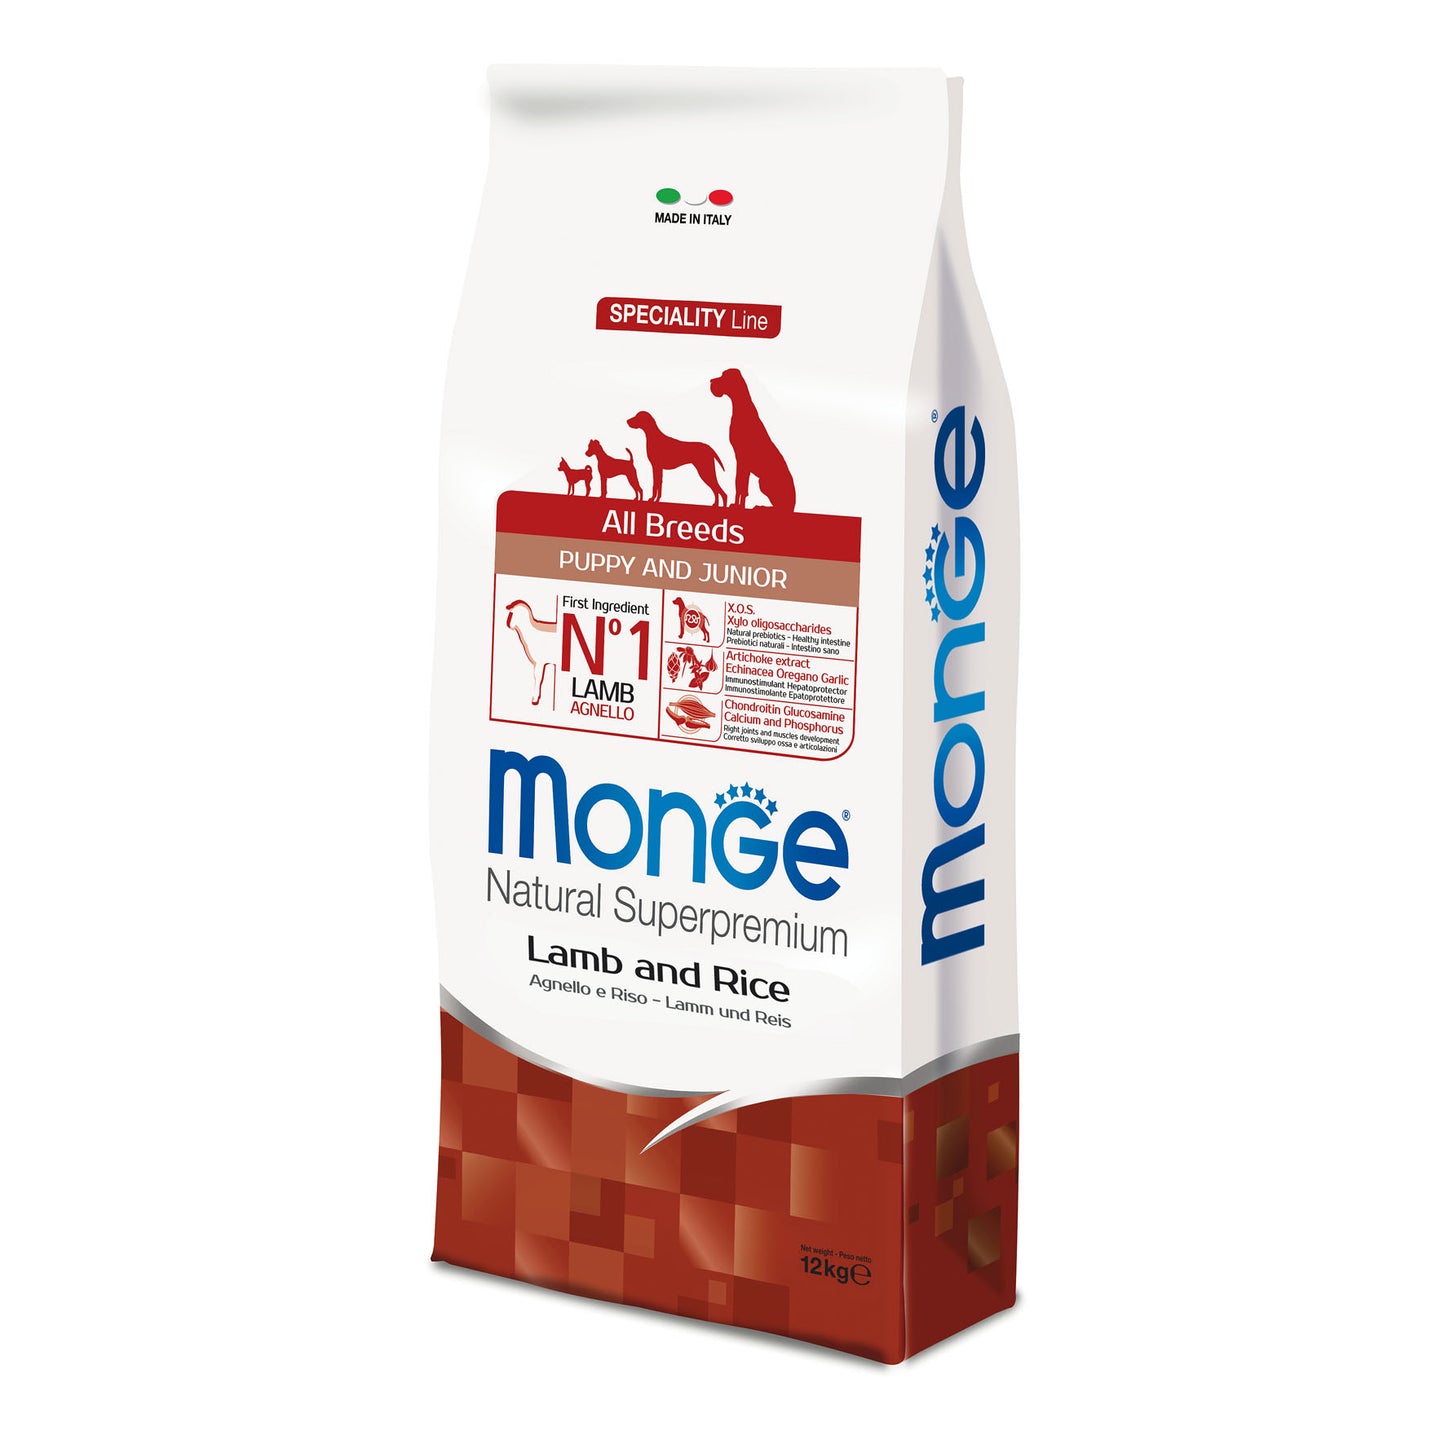 Monge Dog - SPECIALITY Line - Monoprotein - Puppy&Junior ALL BREEDS Lamb